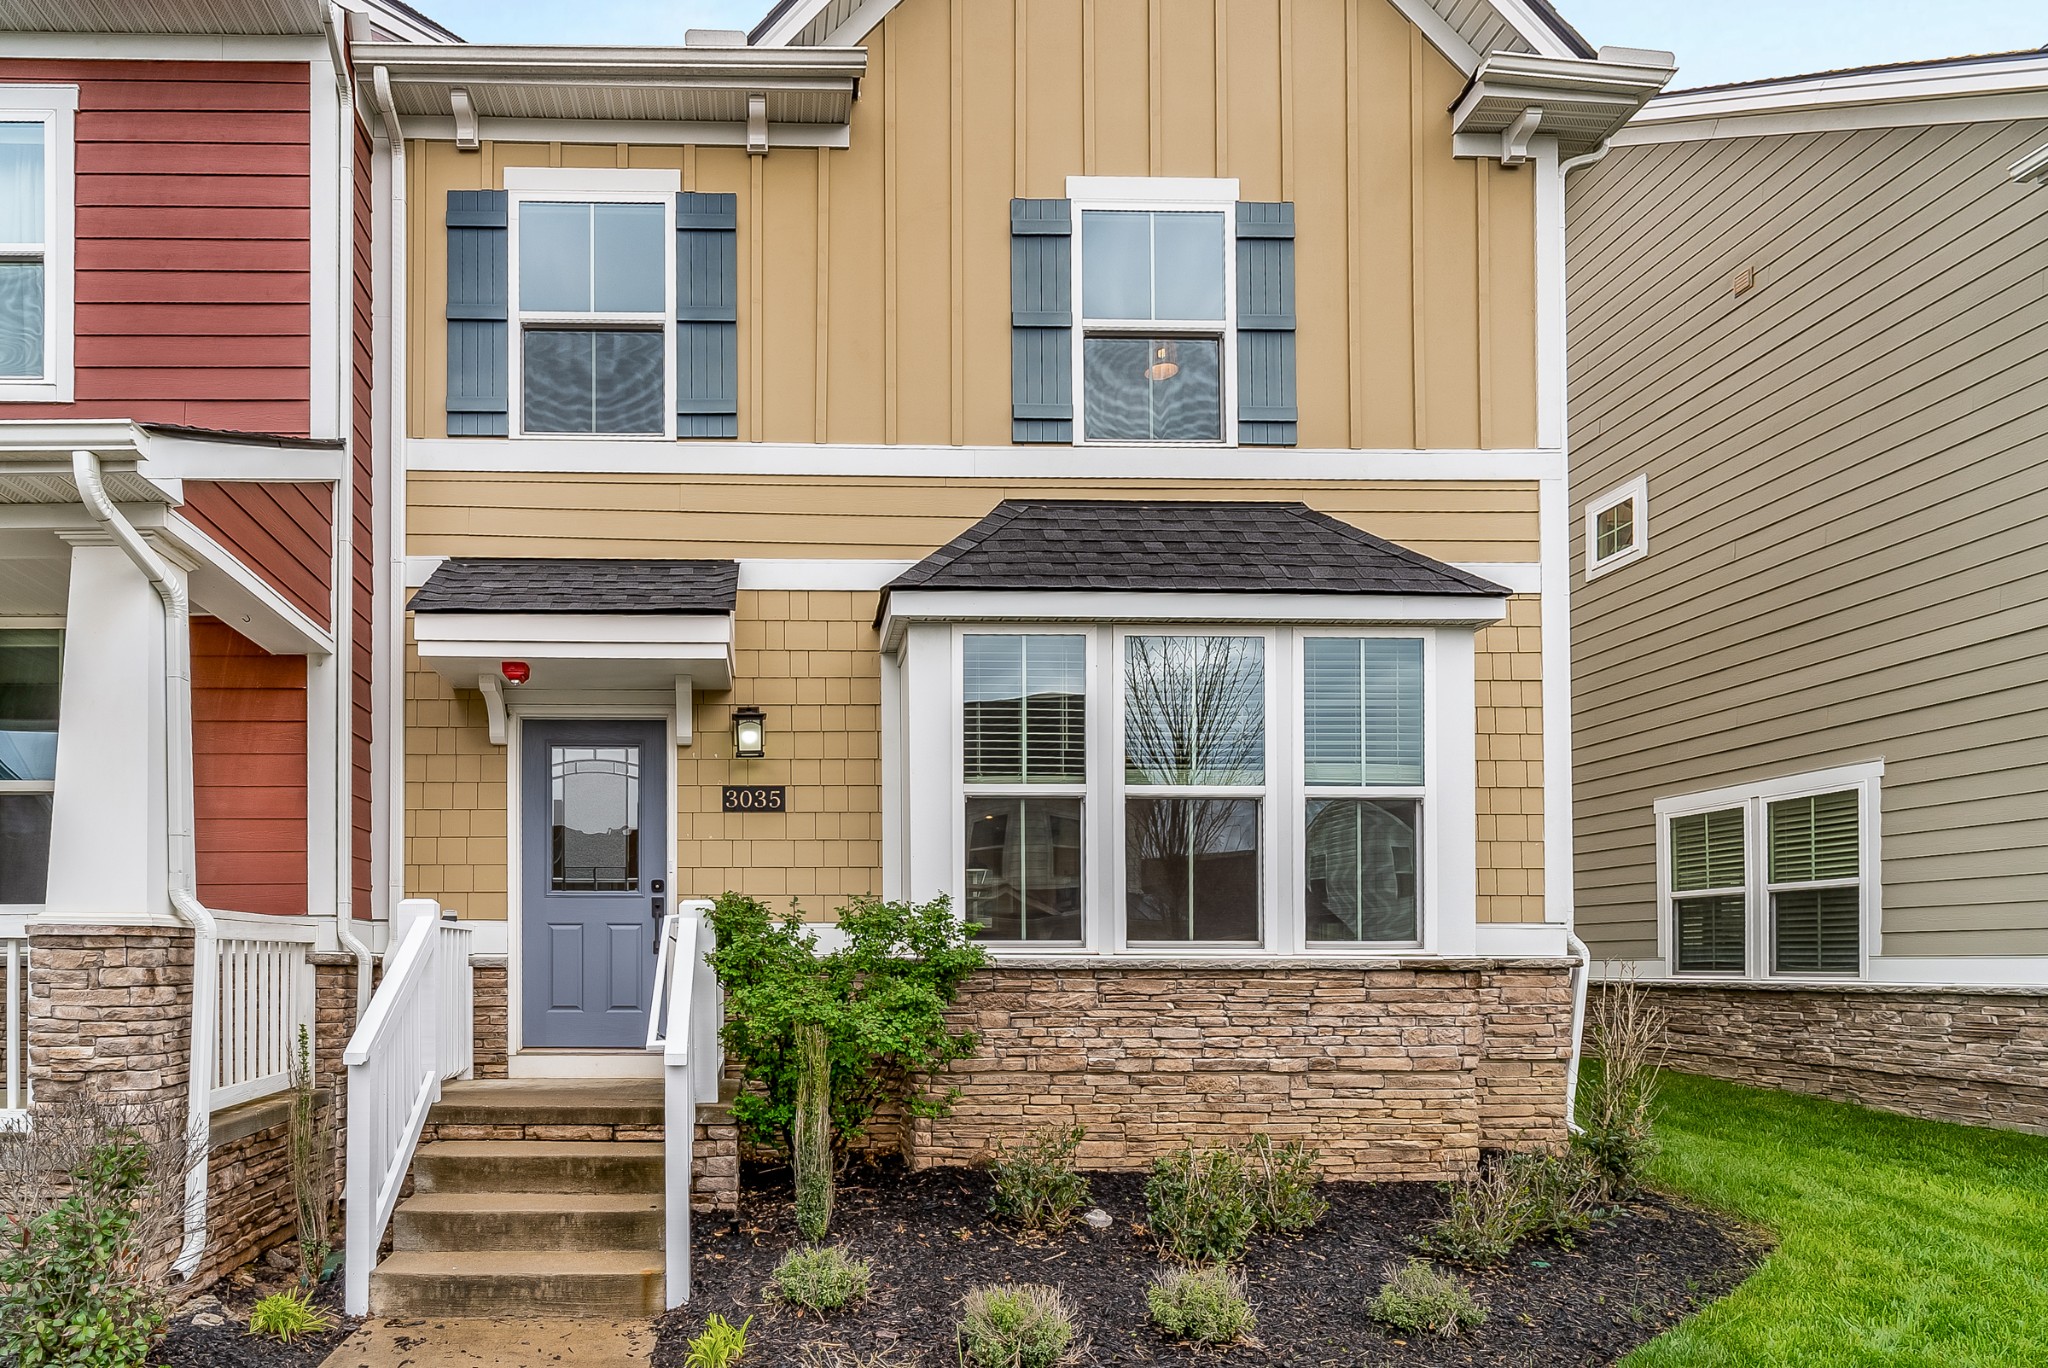 View Franklin, TN 37064 townhome